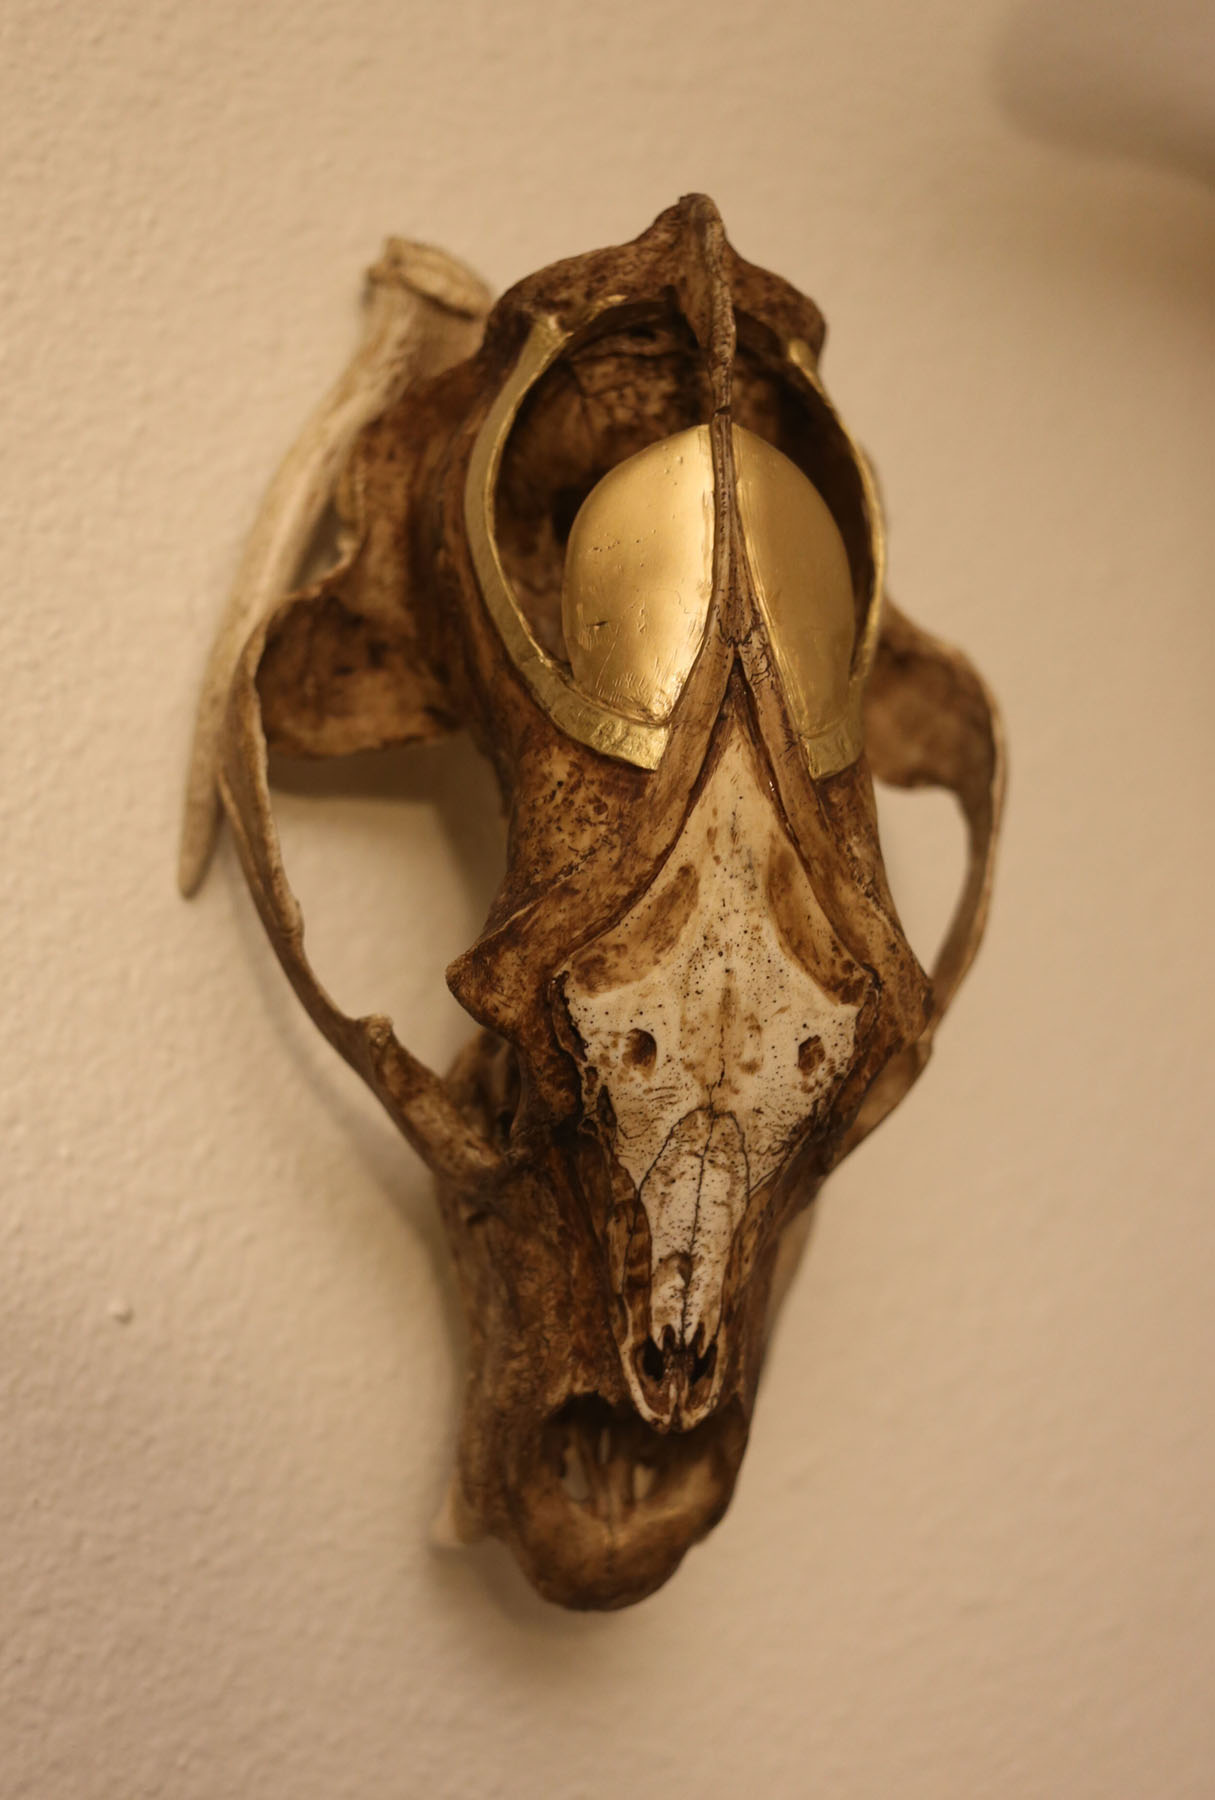 Black bear skull adorned with a caribou antler and alcohol ink. Image courtesy of Indi Walter